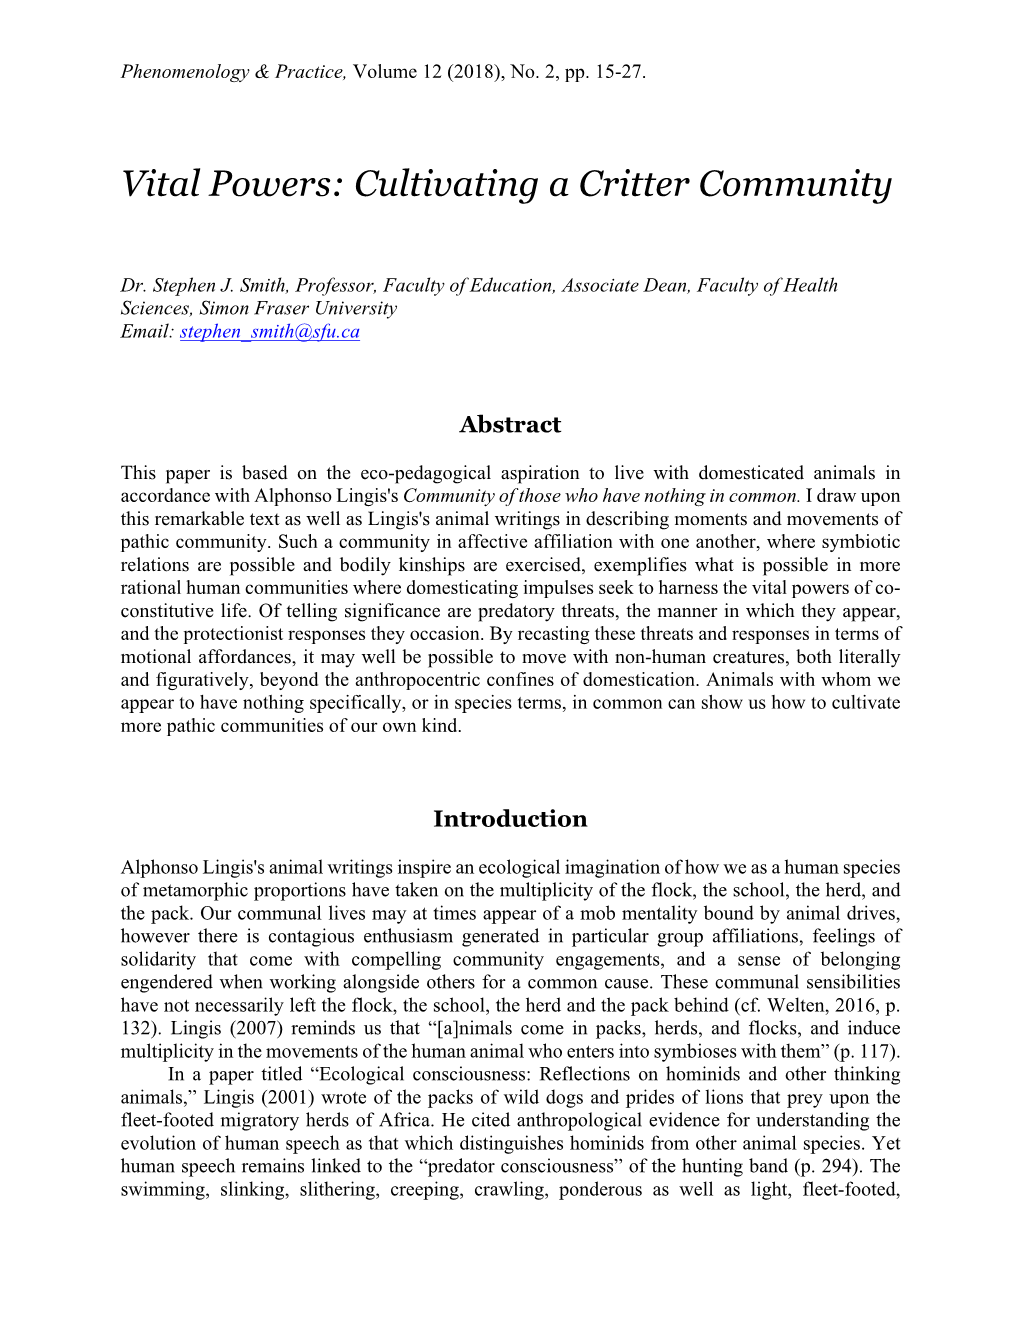 Vital Powers: Cultivating a Critter Community